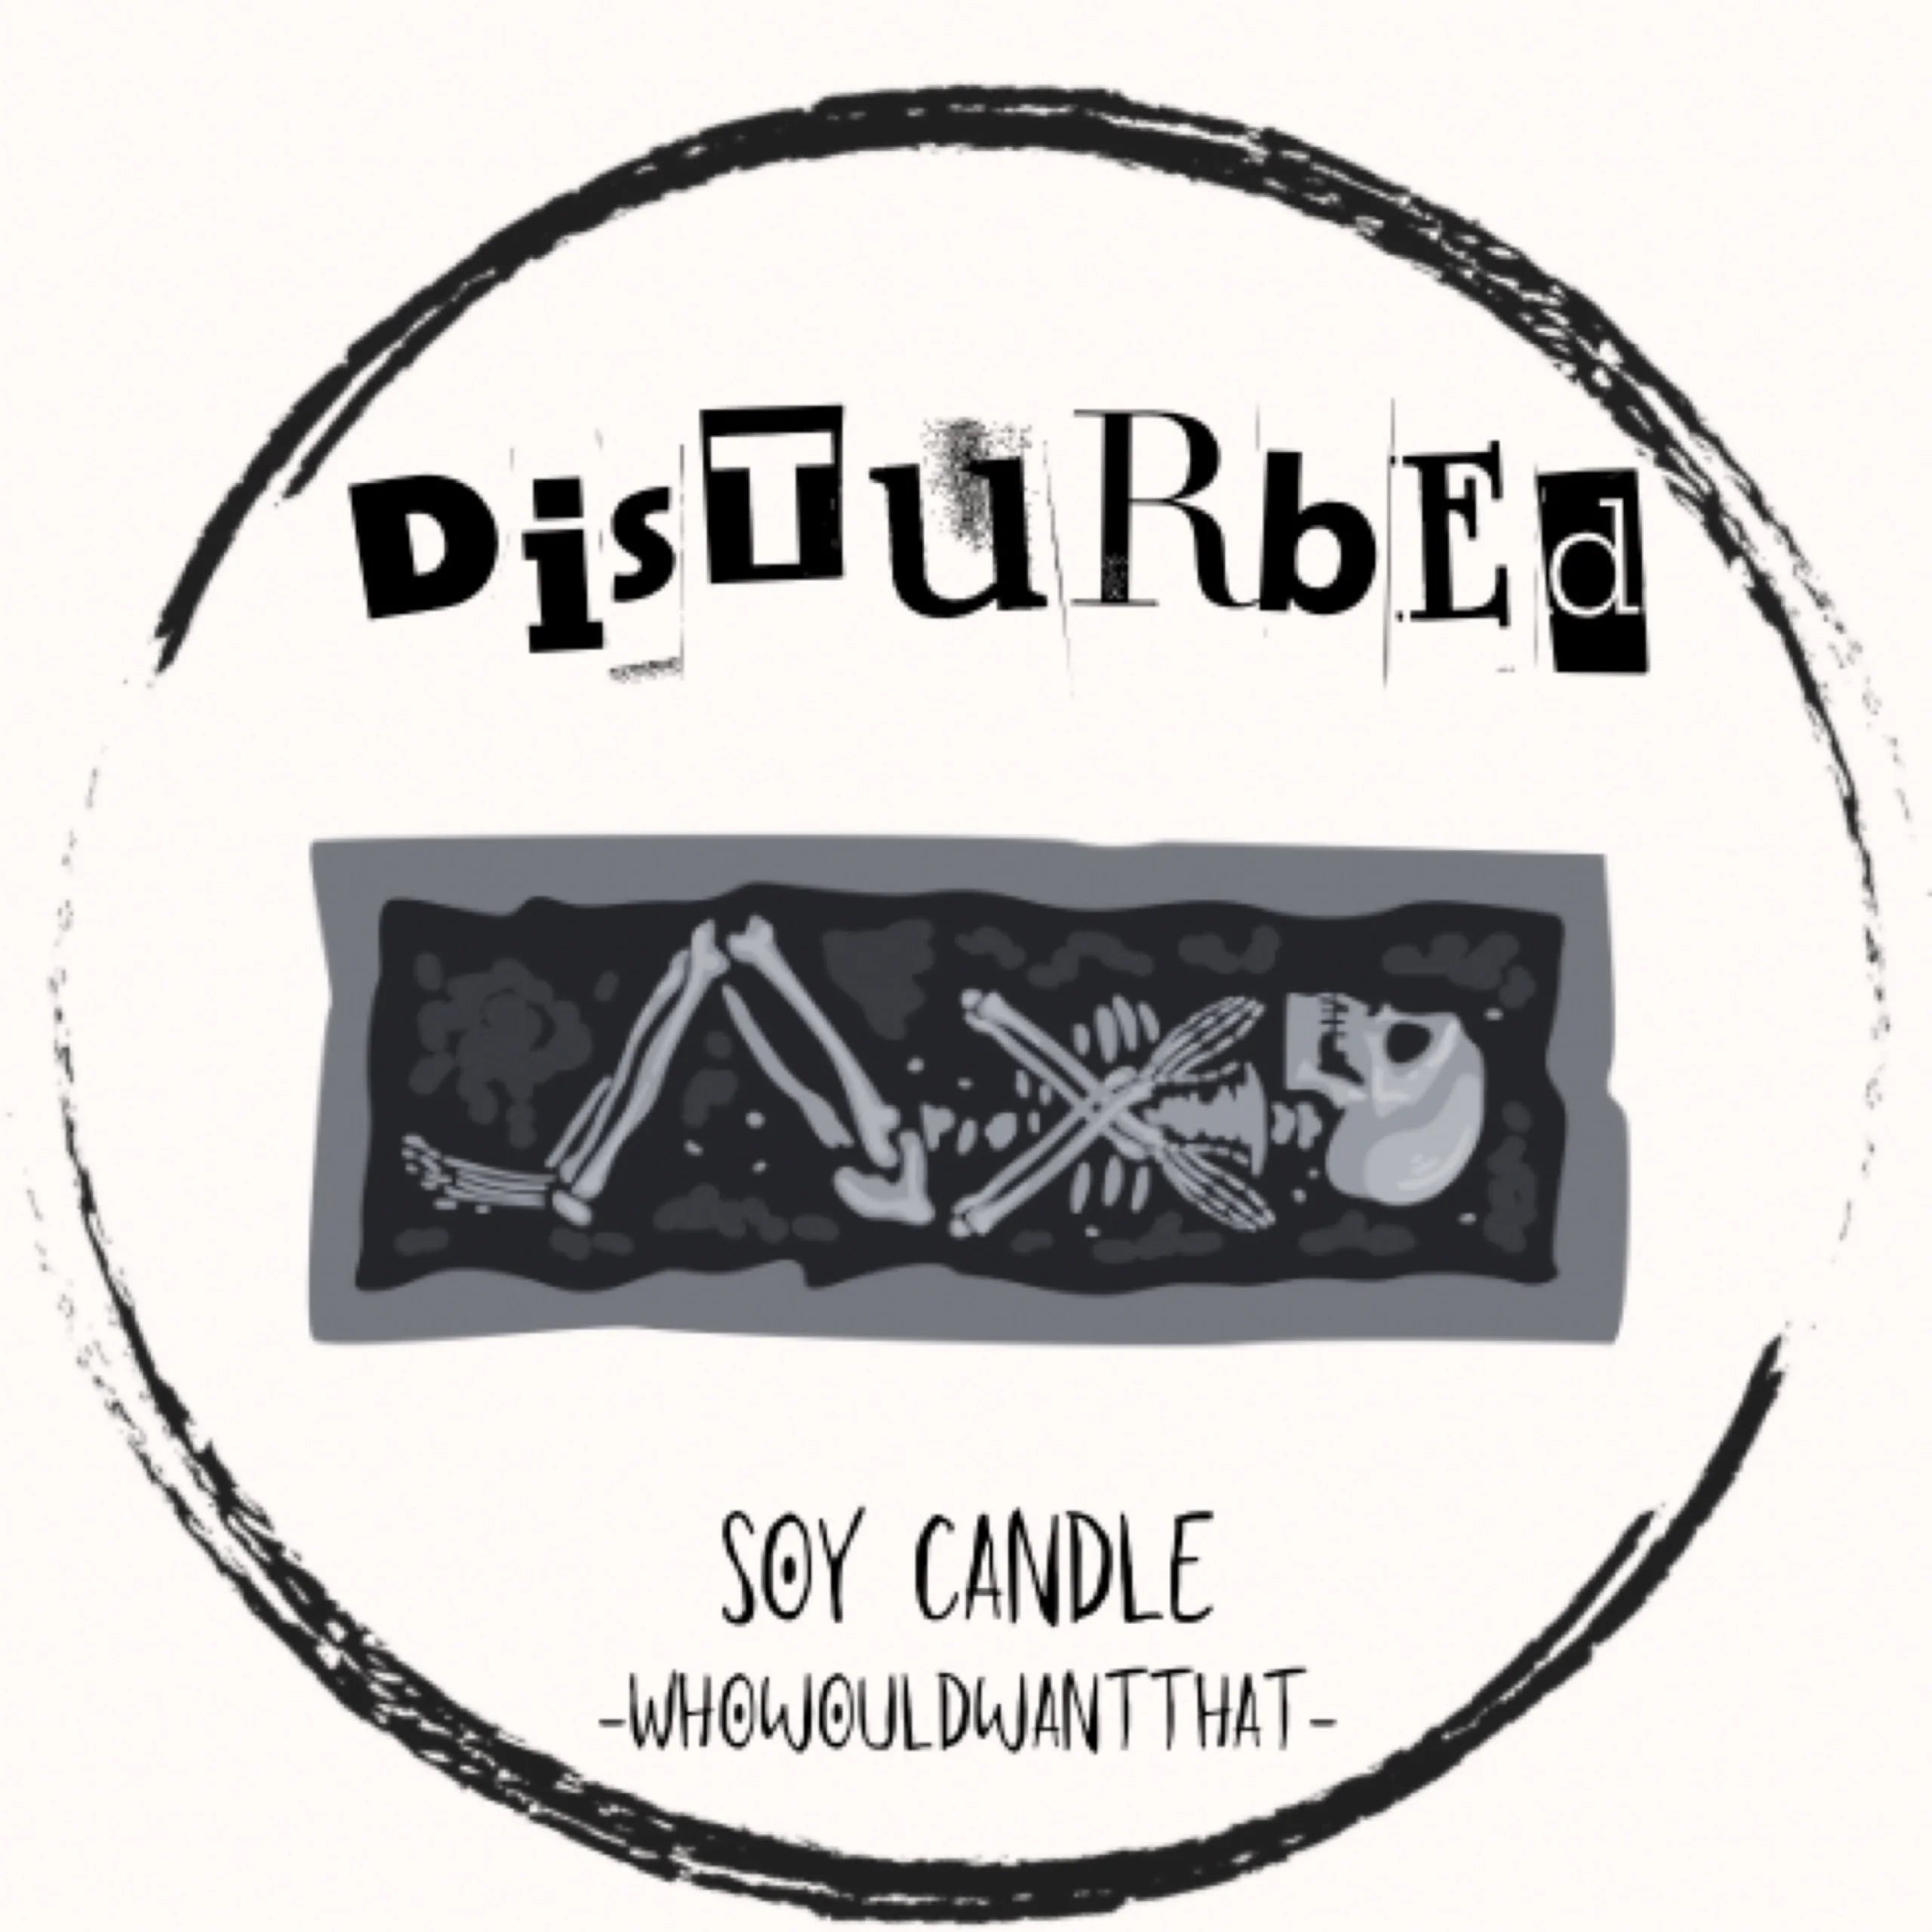 Disturbed Candle - 4 oz Scented Soy Candle - Who Would Want That